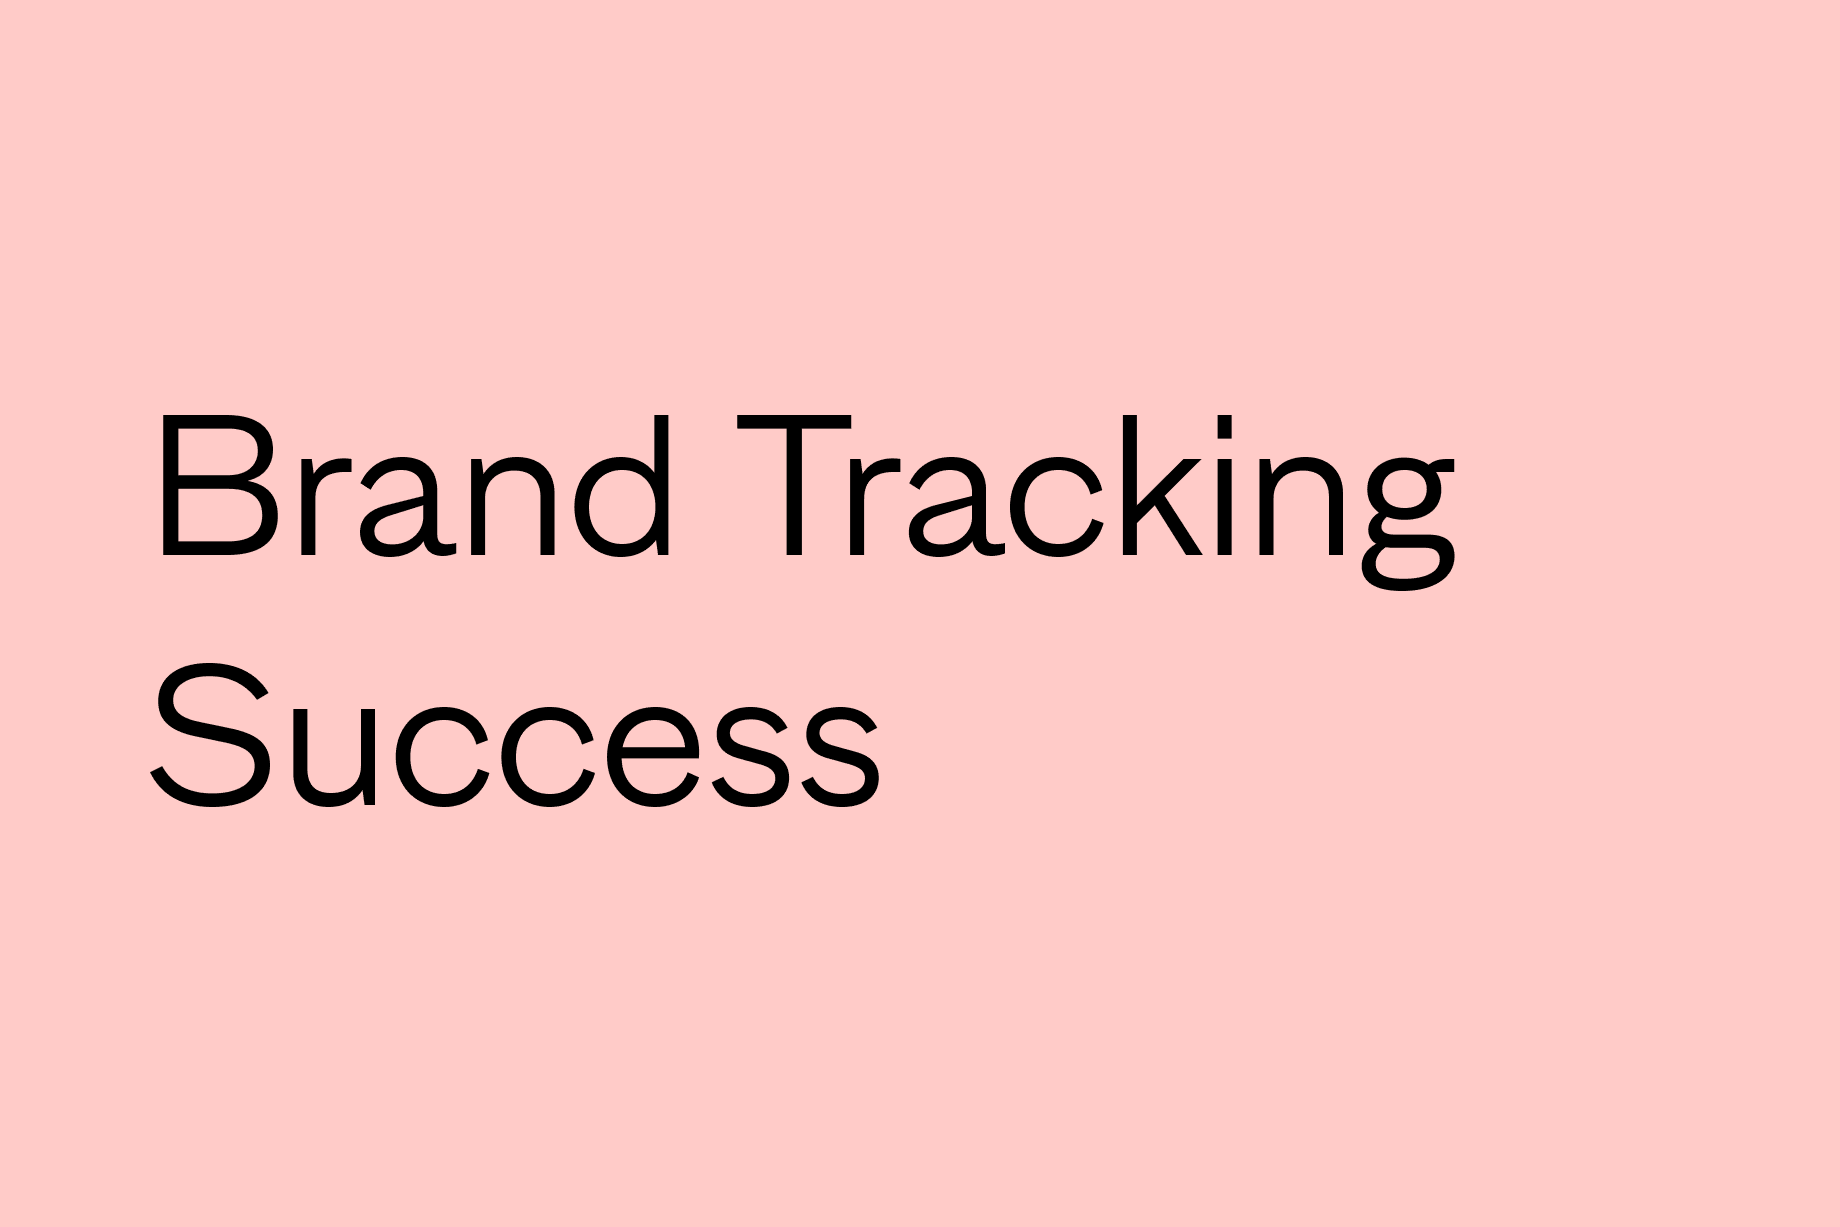 6 Key Elements of Brand Tracking Success